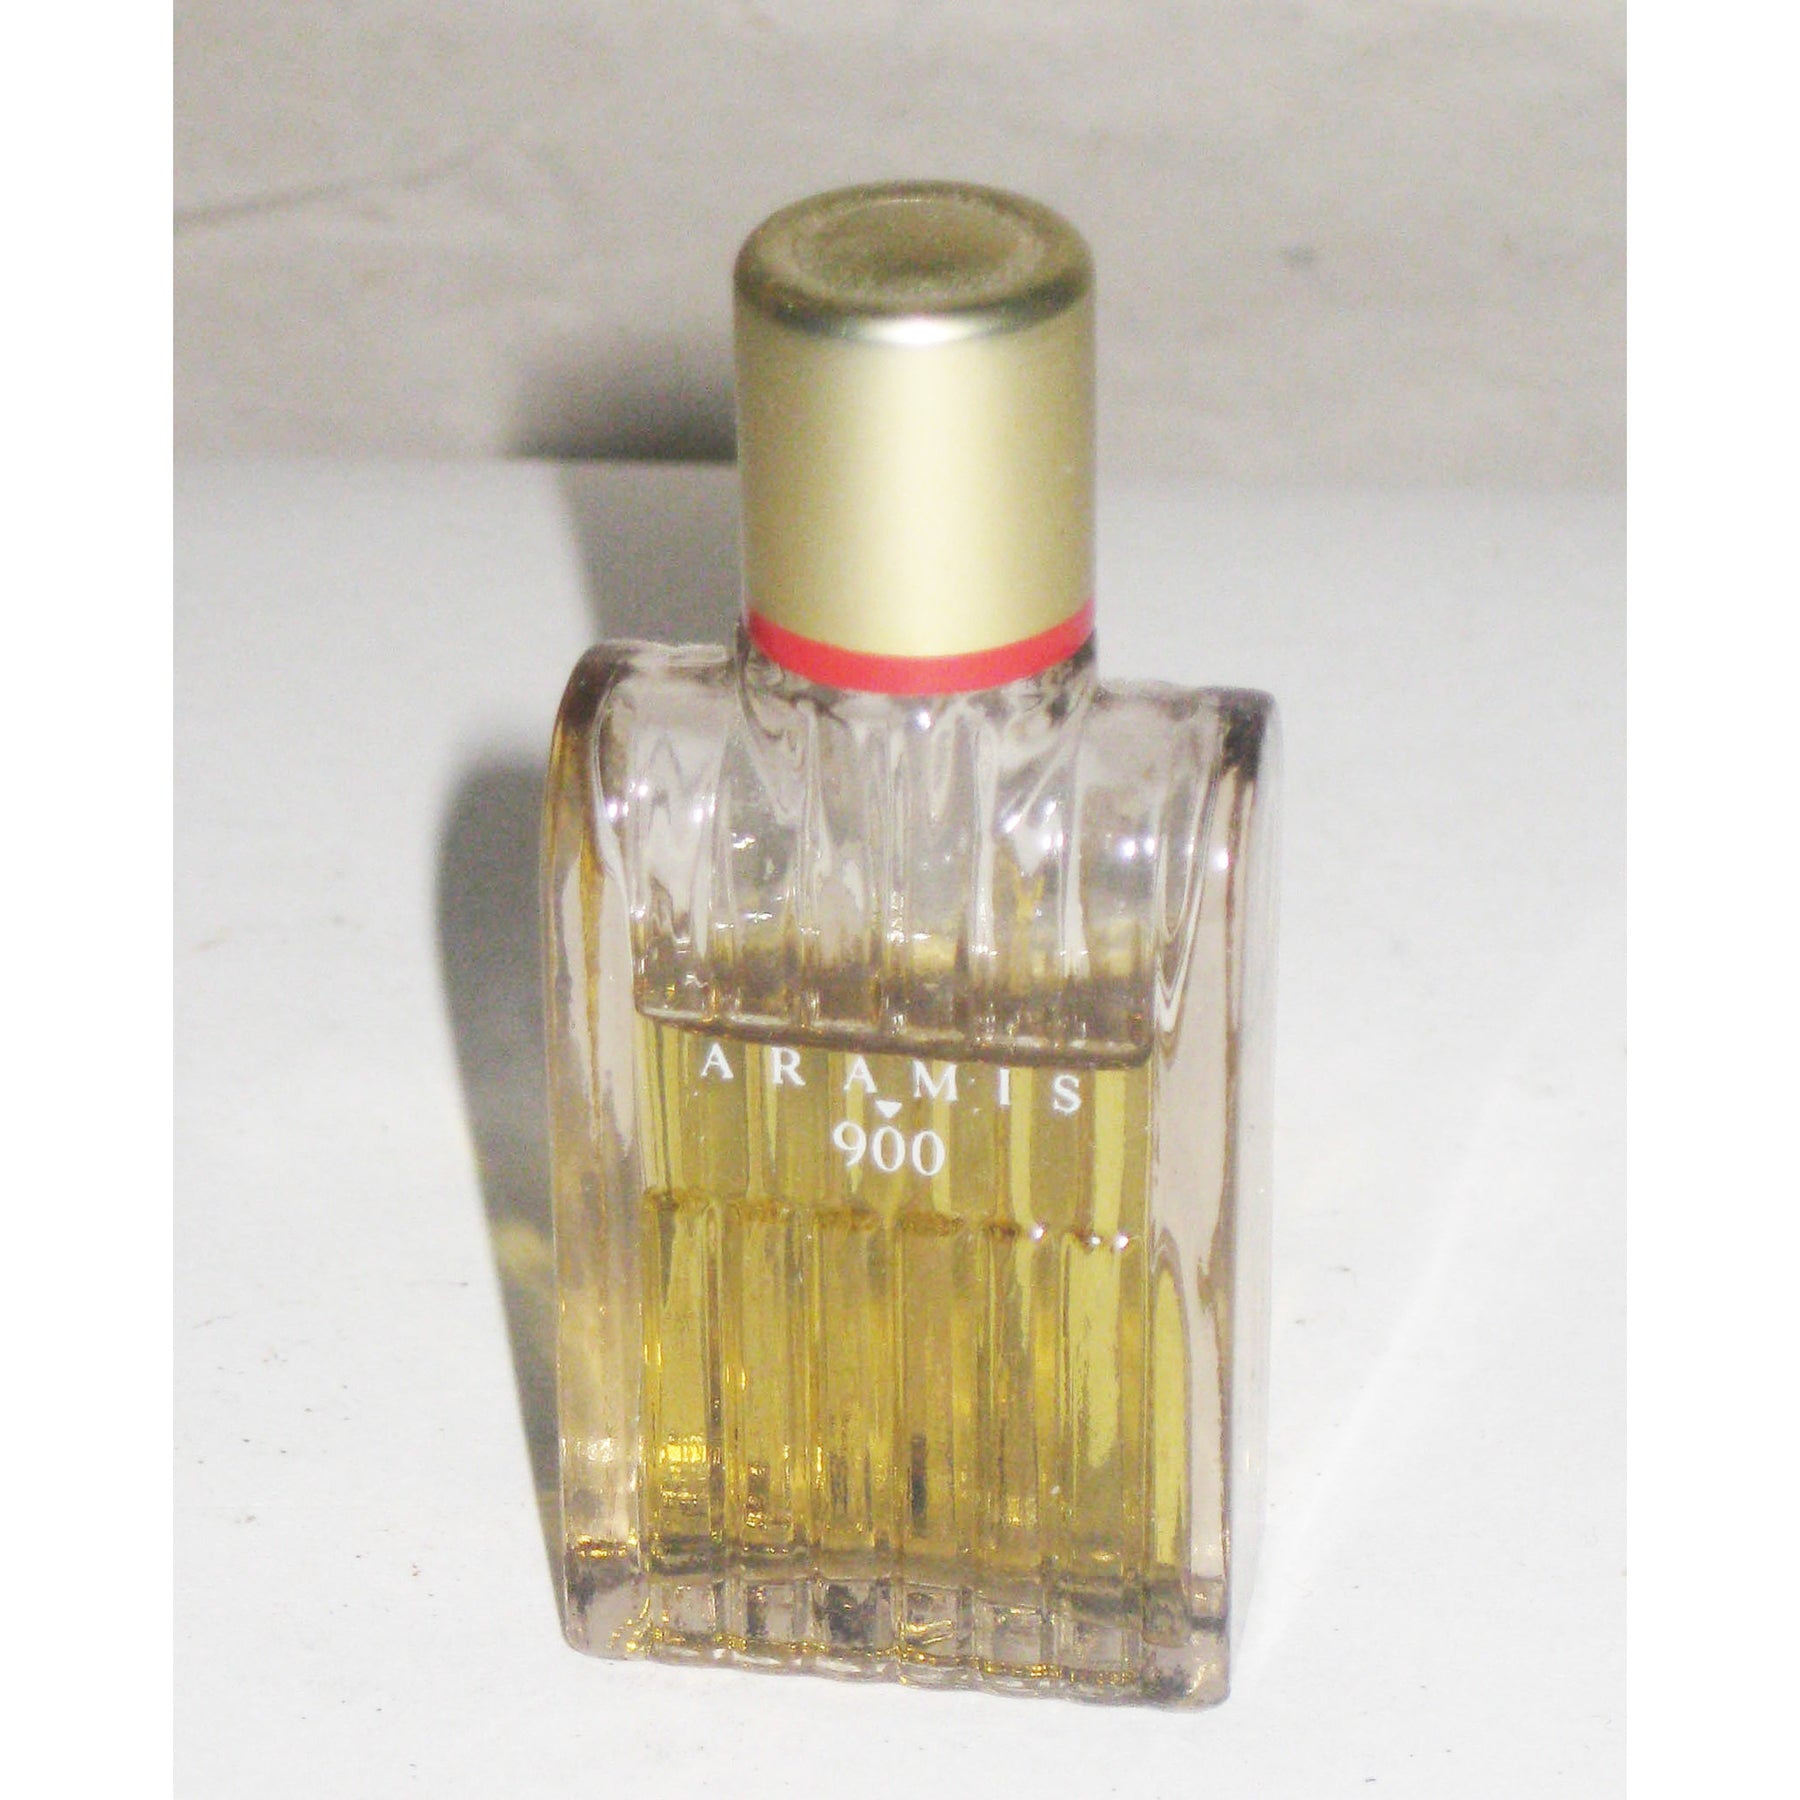 Vintage Aramis 900 Cologne Mini – Quirky Finds